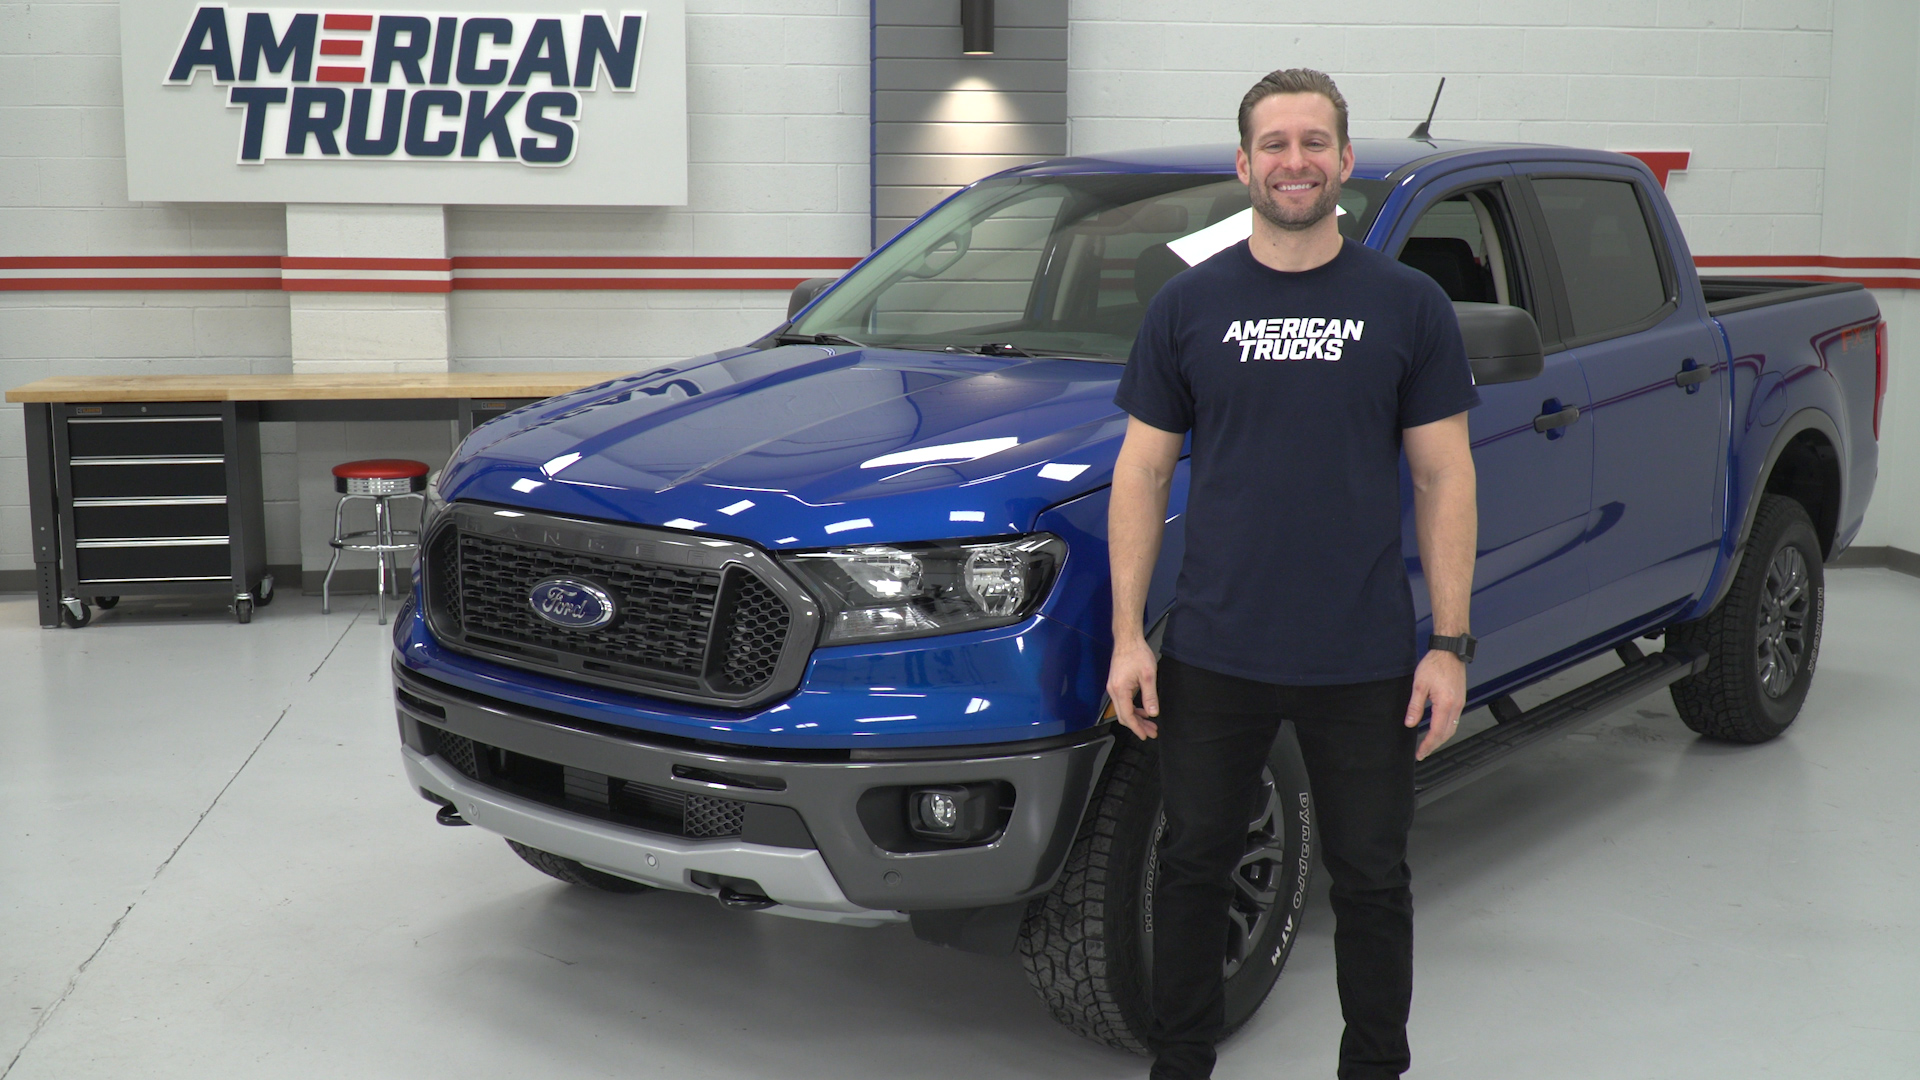 Official 2019 Ford Ranger Dyno Test & Review - The Haul